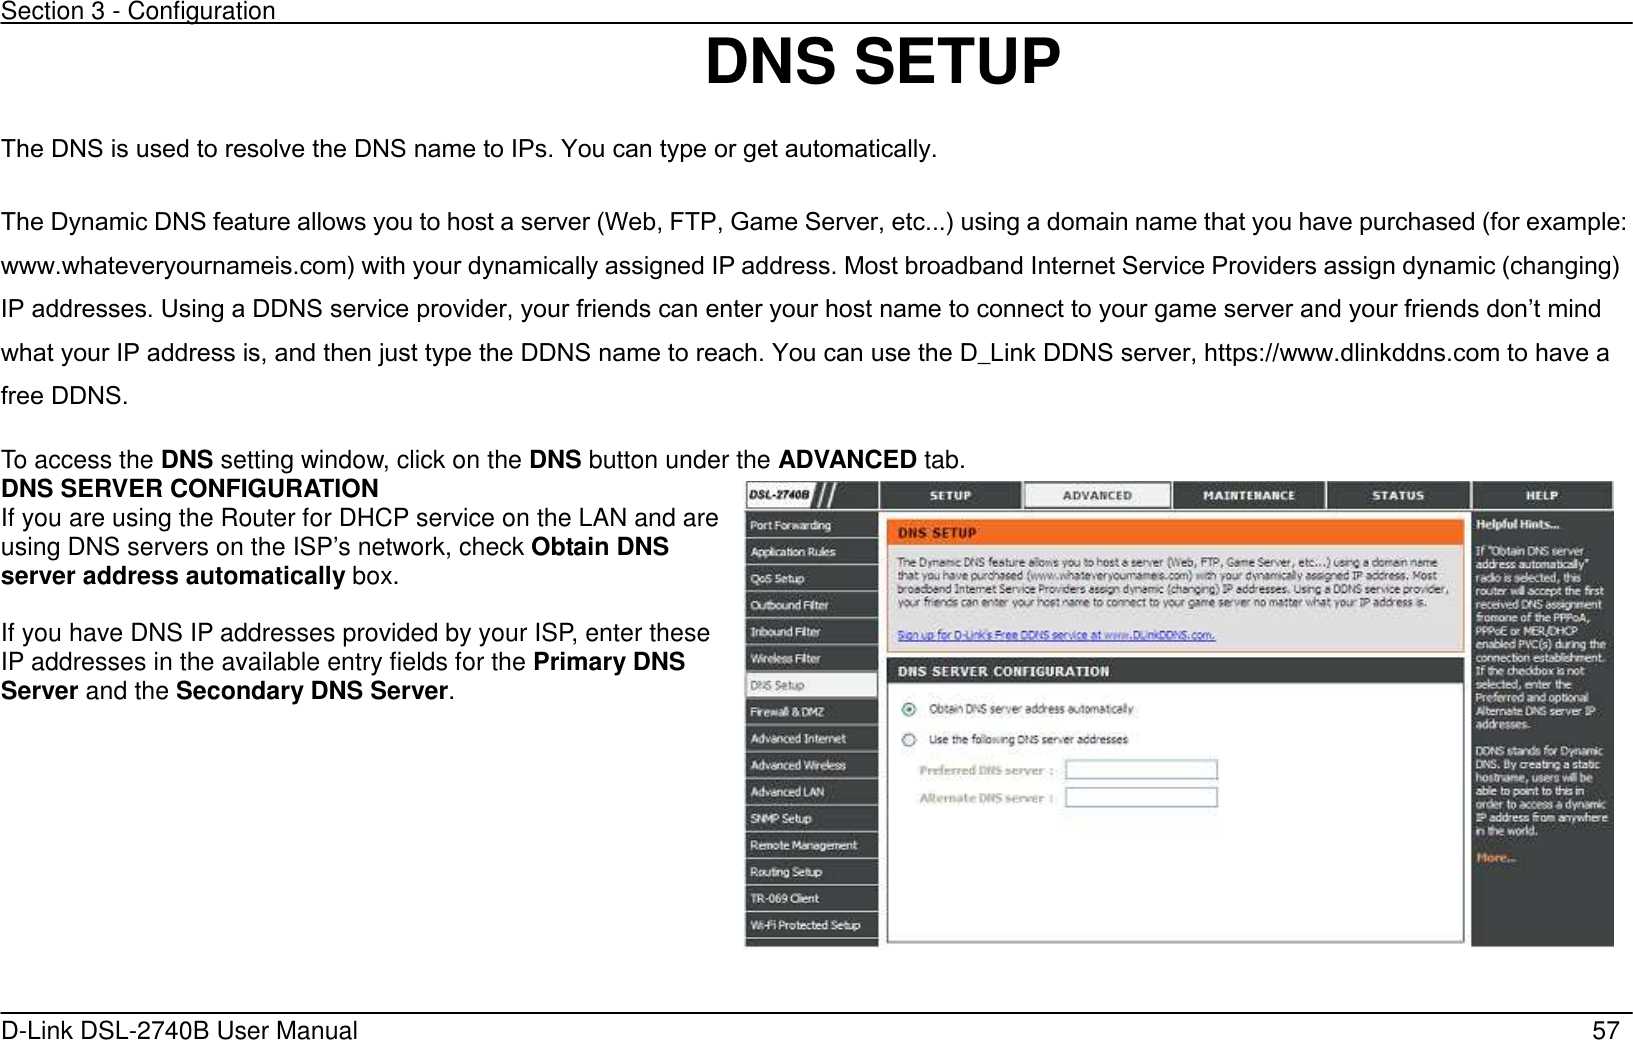 Section 3 - Configuration   D-Link DSL-2740B User Manual                                                  57 DNS SETUP The DNS is used to resolve the DNS name to IPs. You can type or get automatically. The Dynamic DNS feature allows you to host a server (Web, FTP, Game Server, etc...’ using a domain name that you have purchased (for example: www.whateveryournameis.com’ with your dynamically assigned IP address. Most broadband Internet Service Providers assign dynamic (changing’ IP addresses. Using a DDNS service provider, your friends can enter your host name to connect to your game server and your friends dont mind what your IP address is, and then just type the DDNS name to reach. You can use the D_Link DDNS server, https://www.dlinkddns.com to have a free DDNS.   To access the DNS setting window, click on the DNS button under the ADVANCED tab.  DNS SERVER CONFIGURATION If you are using the Router for DHCP service on the LAN and are using DNS servers on the ISP’s network, check Obtain DNS server address automatically box.  If you have DNS IP addresses provided by your ISP, enter these IP addresses in the available entry fields for the Primary DNS Server and the Secondary DNS Server.    